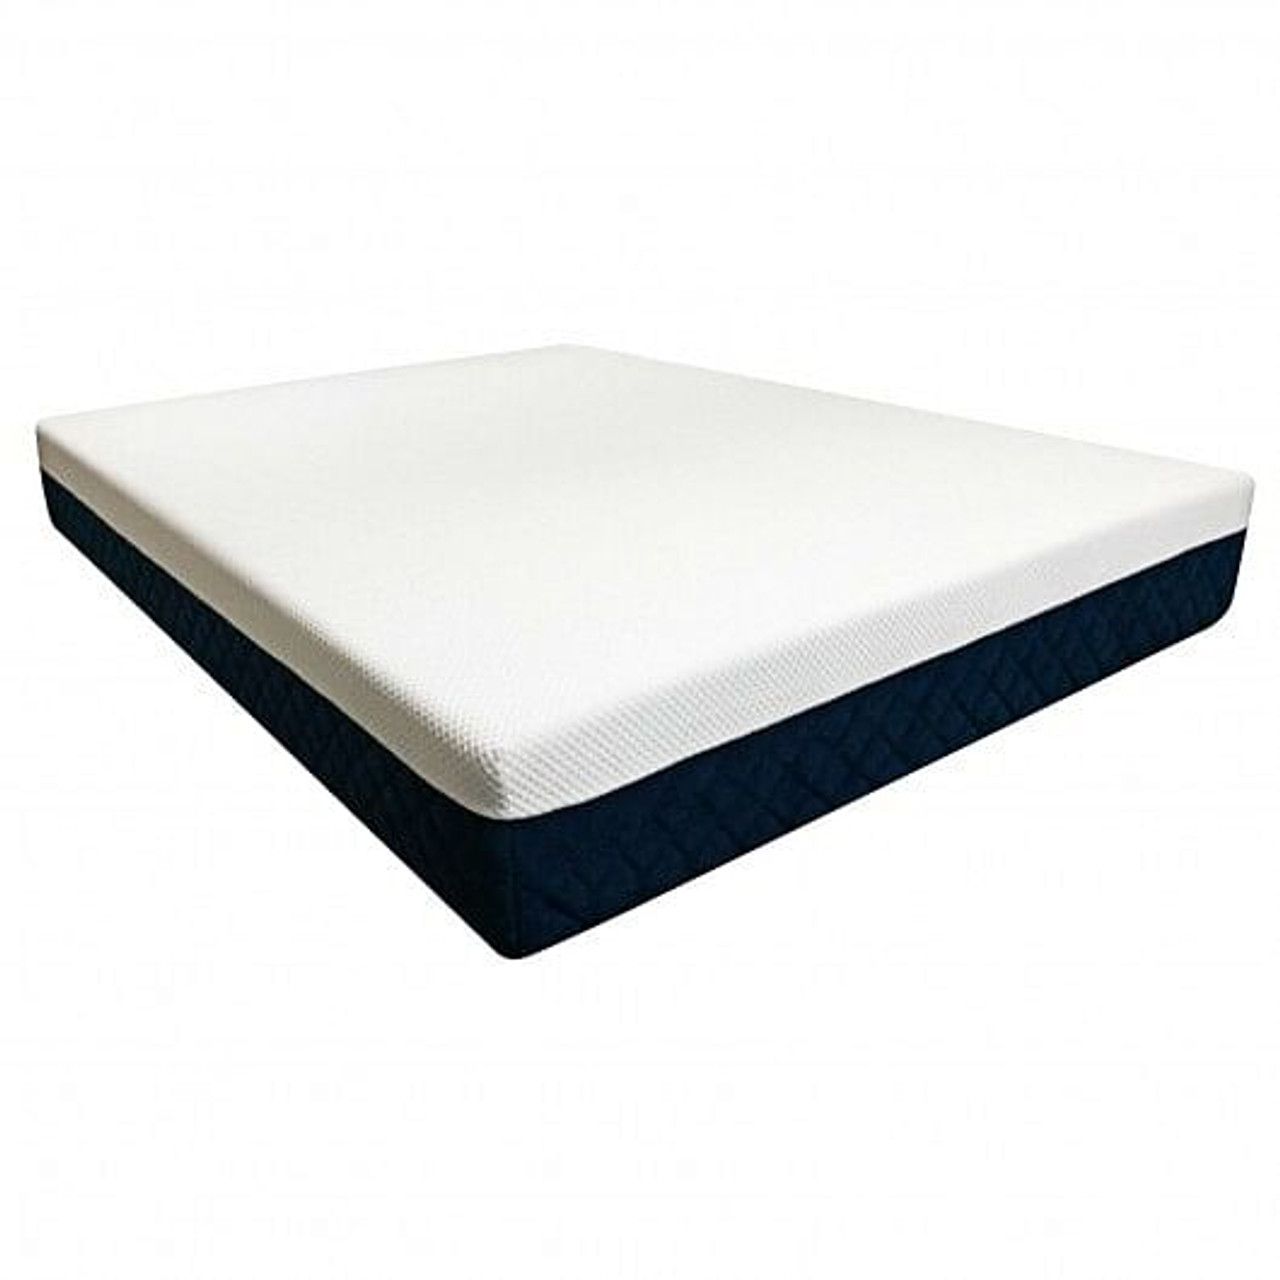 10 Inch Mattress with Jacquard Fabric Cover in a Box-Full Size